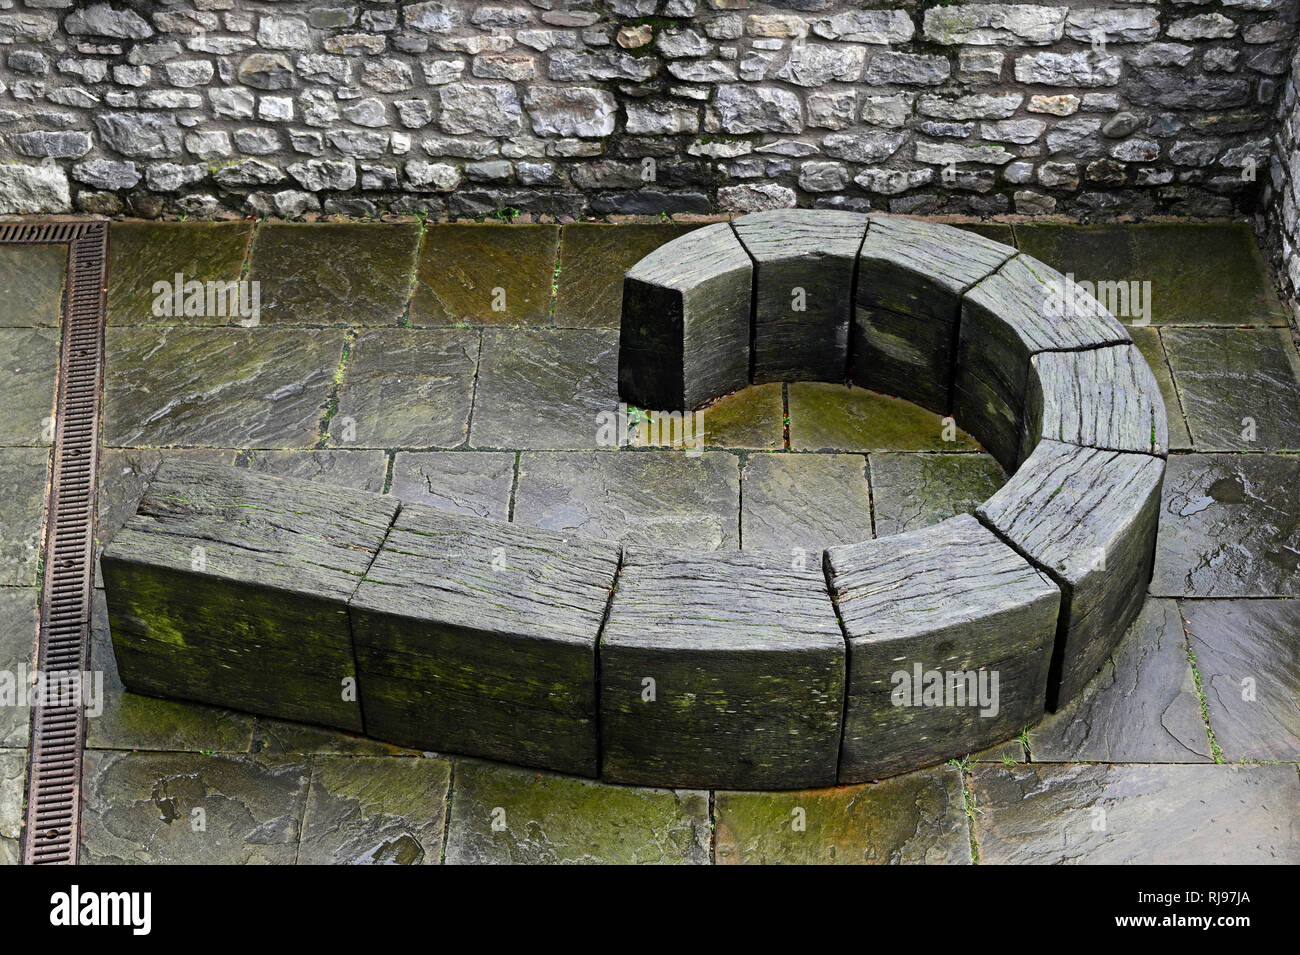 Curved wooden seat outdoor artwork. The Brewery Arts Centre, Kendal, Cumbria,. England, United Kingdom, Europe. Stock Photo